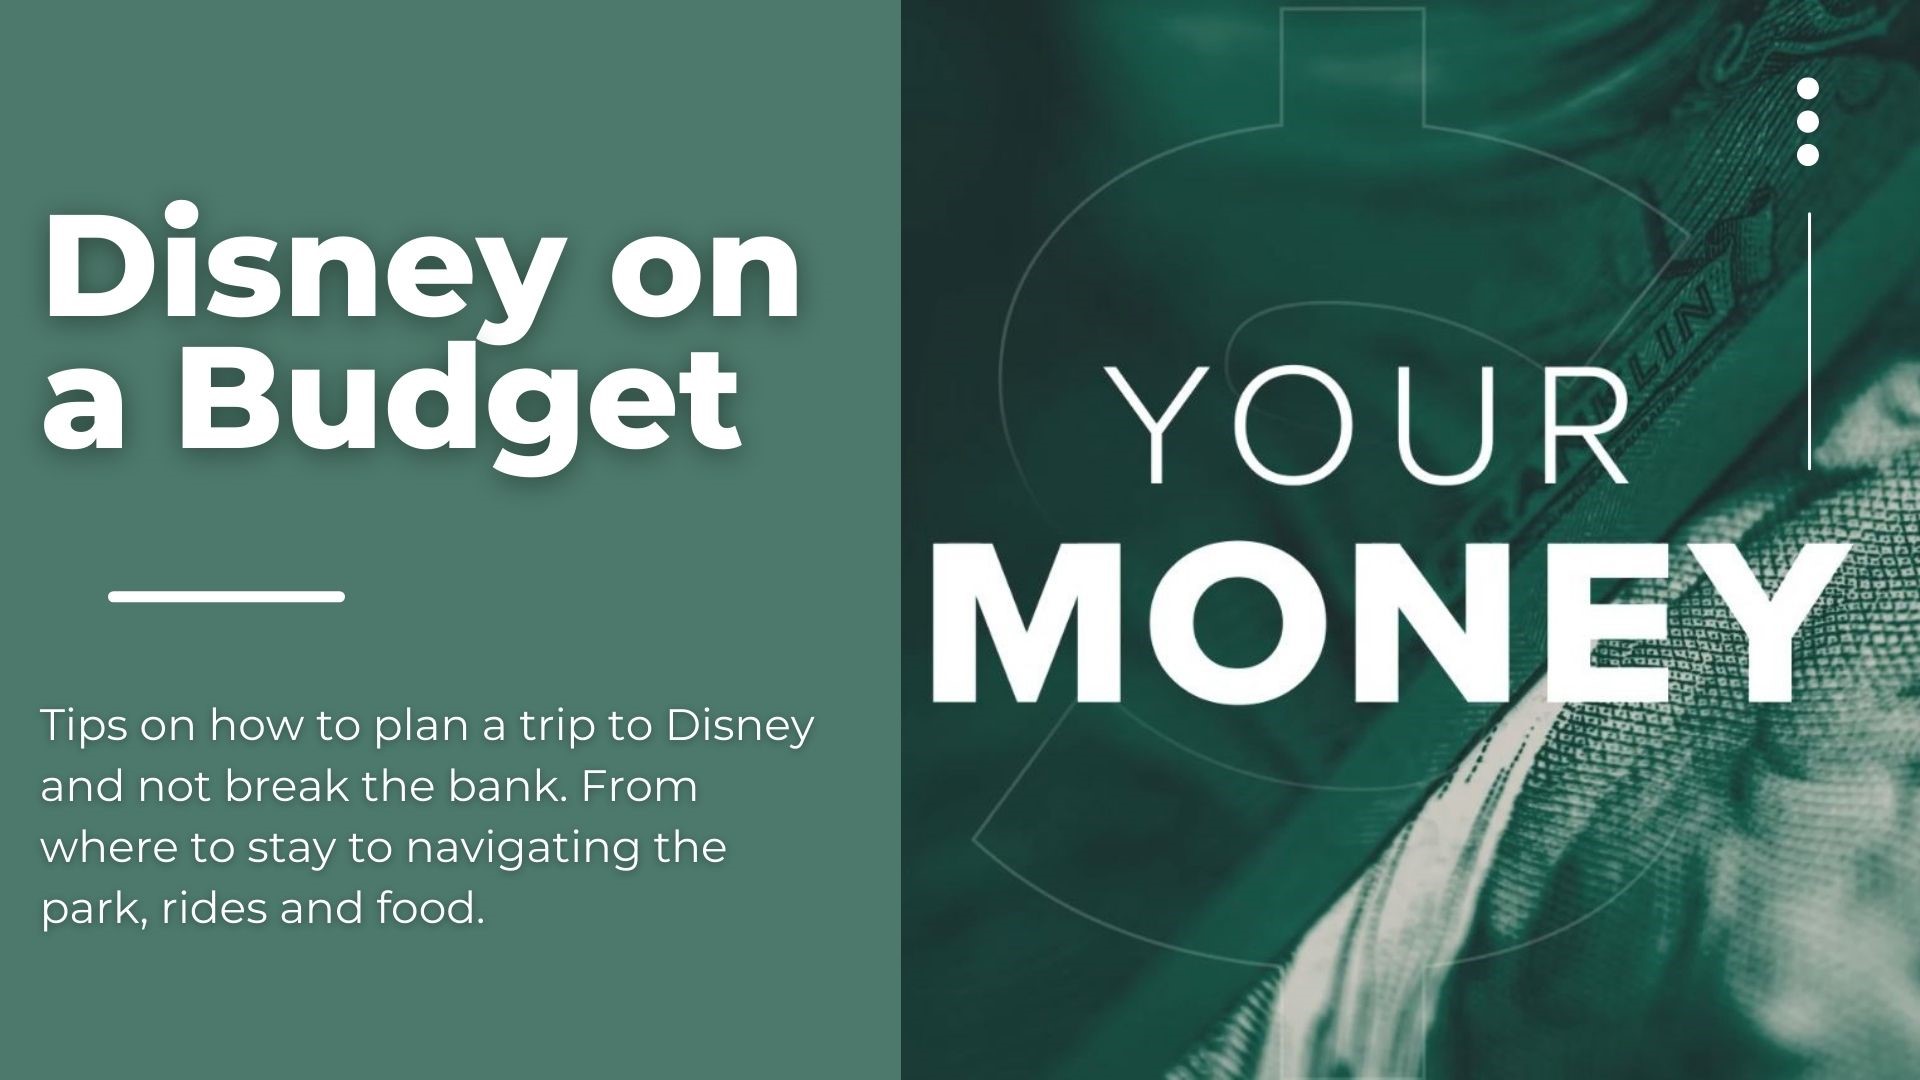 Tips on how to fit a Disney vacation into your budget.